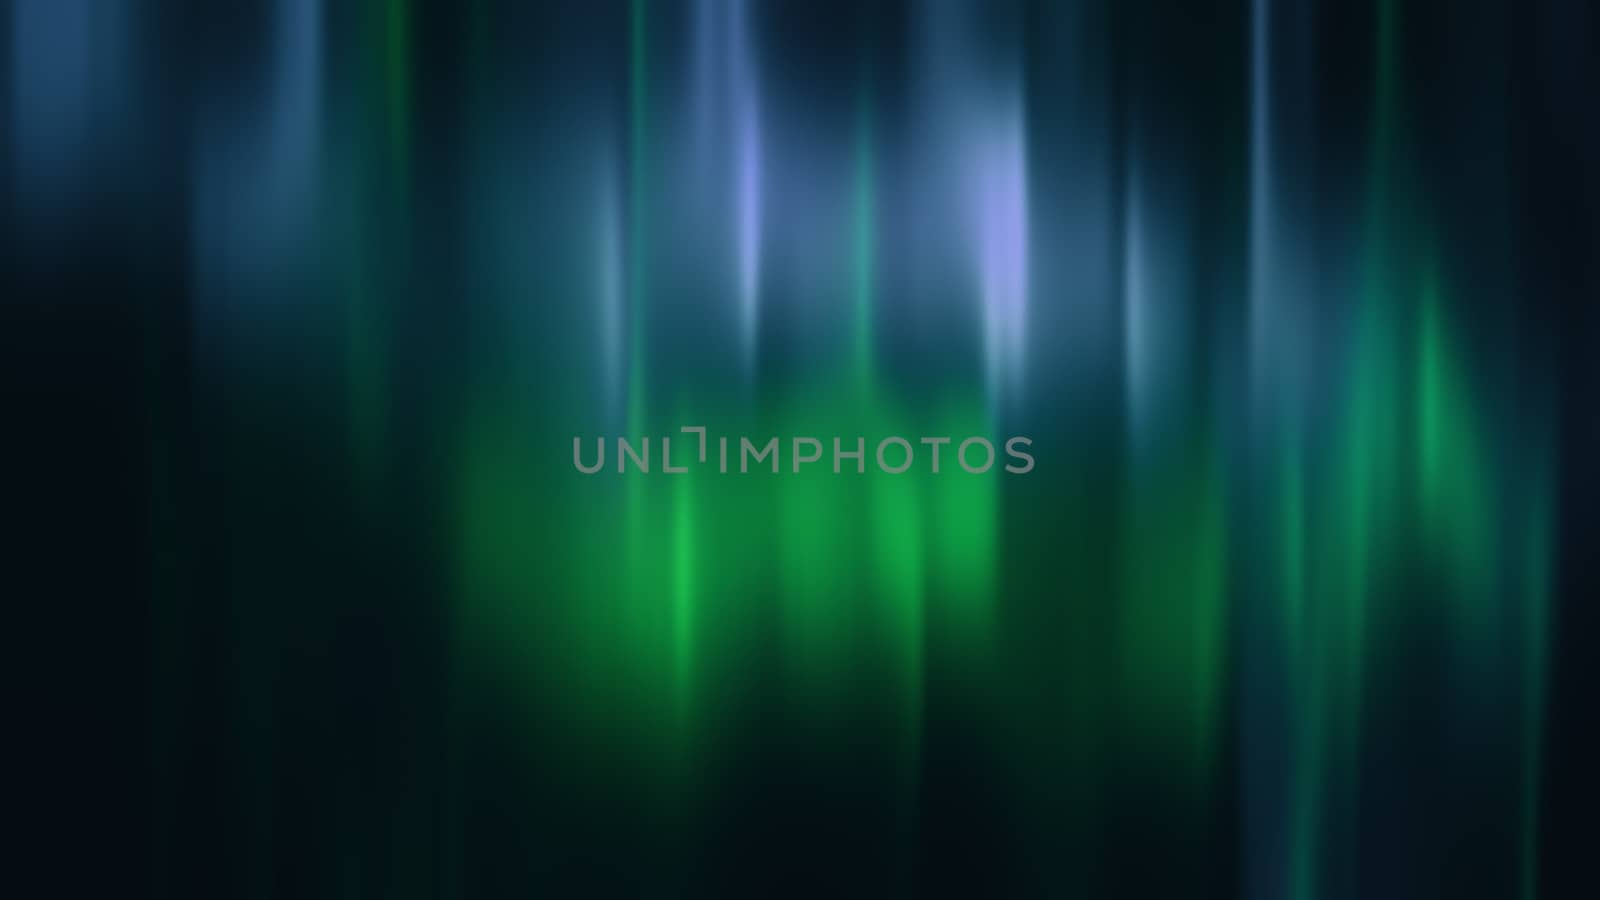 Realistic Aurora Borealis or Northern lights. Bright and beautiful green and blue polar light curtains on black background. 3D illustration overlay with alpha channel matte for compositing